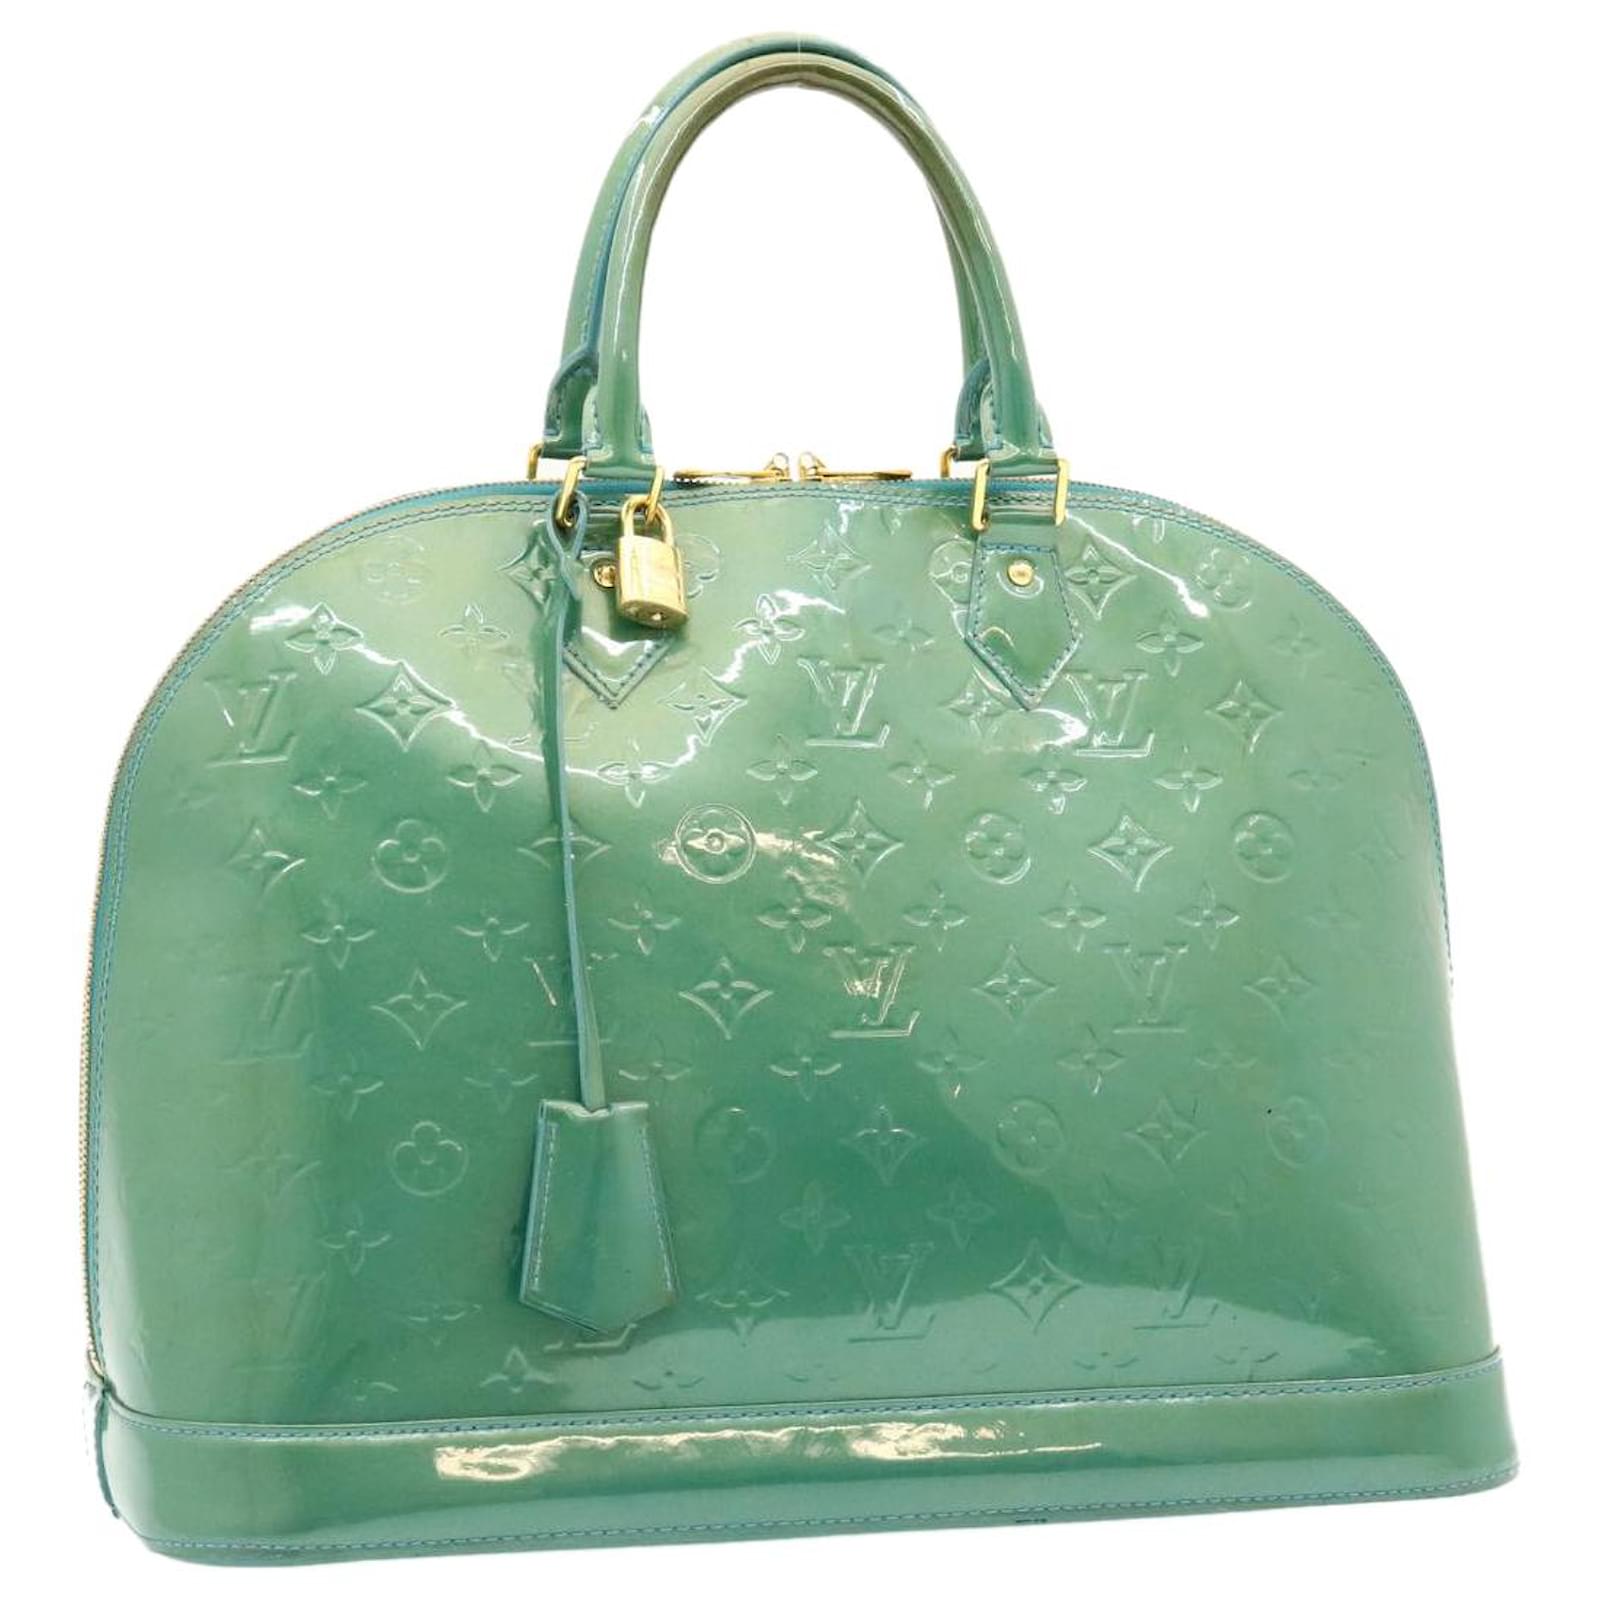 Alma patent leather handbag Louis Vuitton Blue in Patent leather